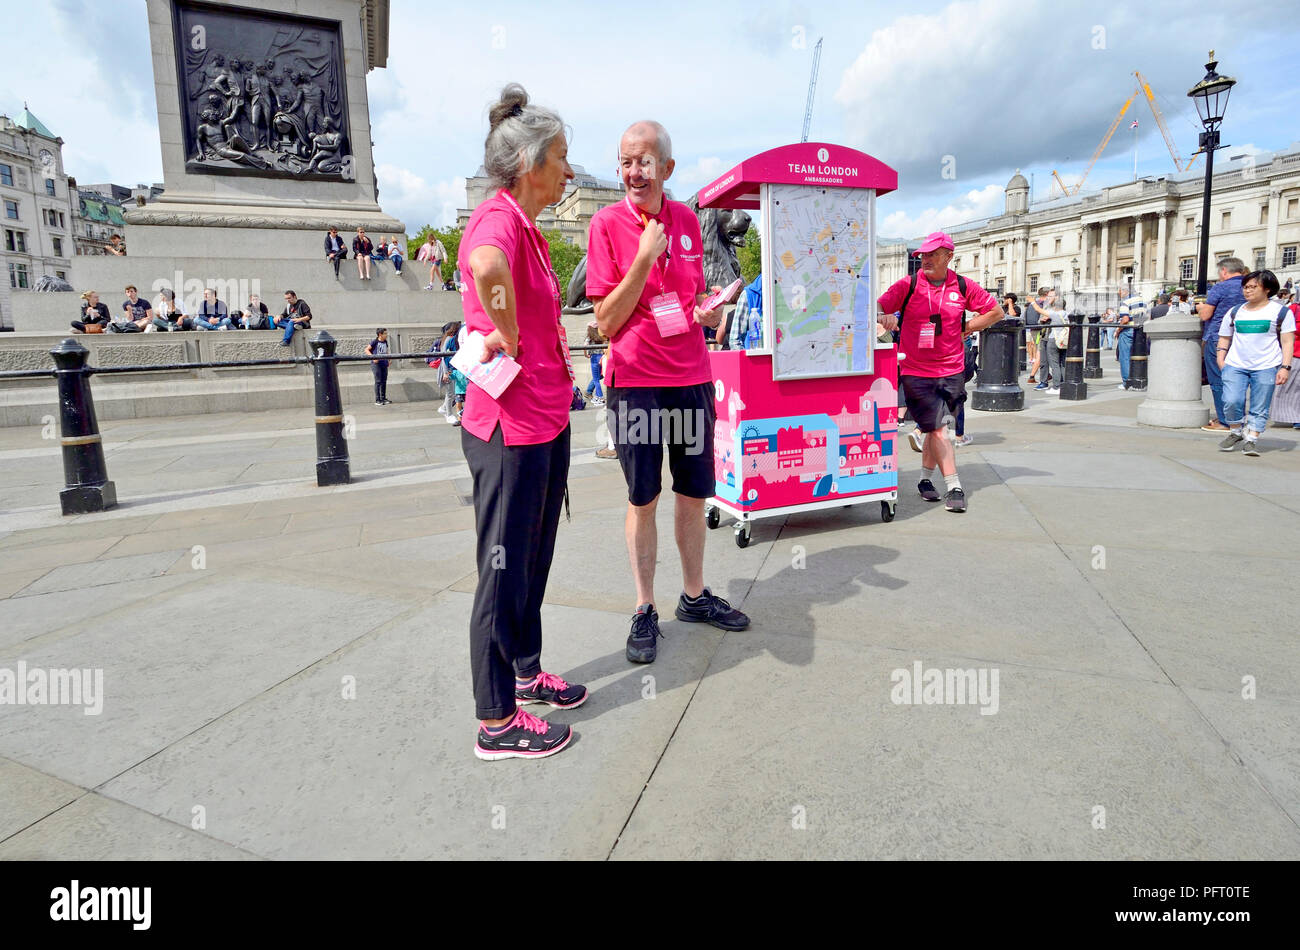 Team London Ambassadors, volunteers helping tourists in Trafalgar Square, London, England, UK. A scheme started for visitors to the 2012 Olympics and  Stock Photo